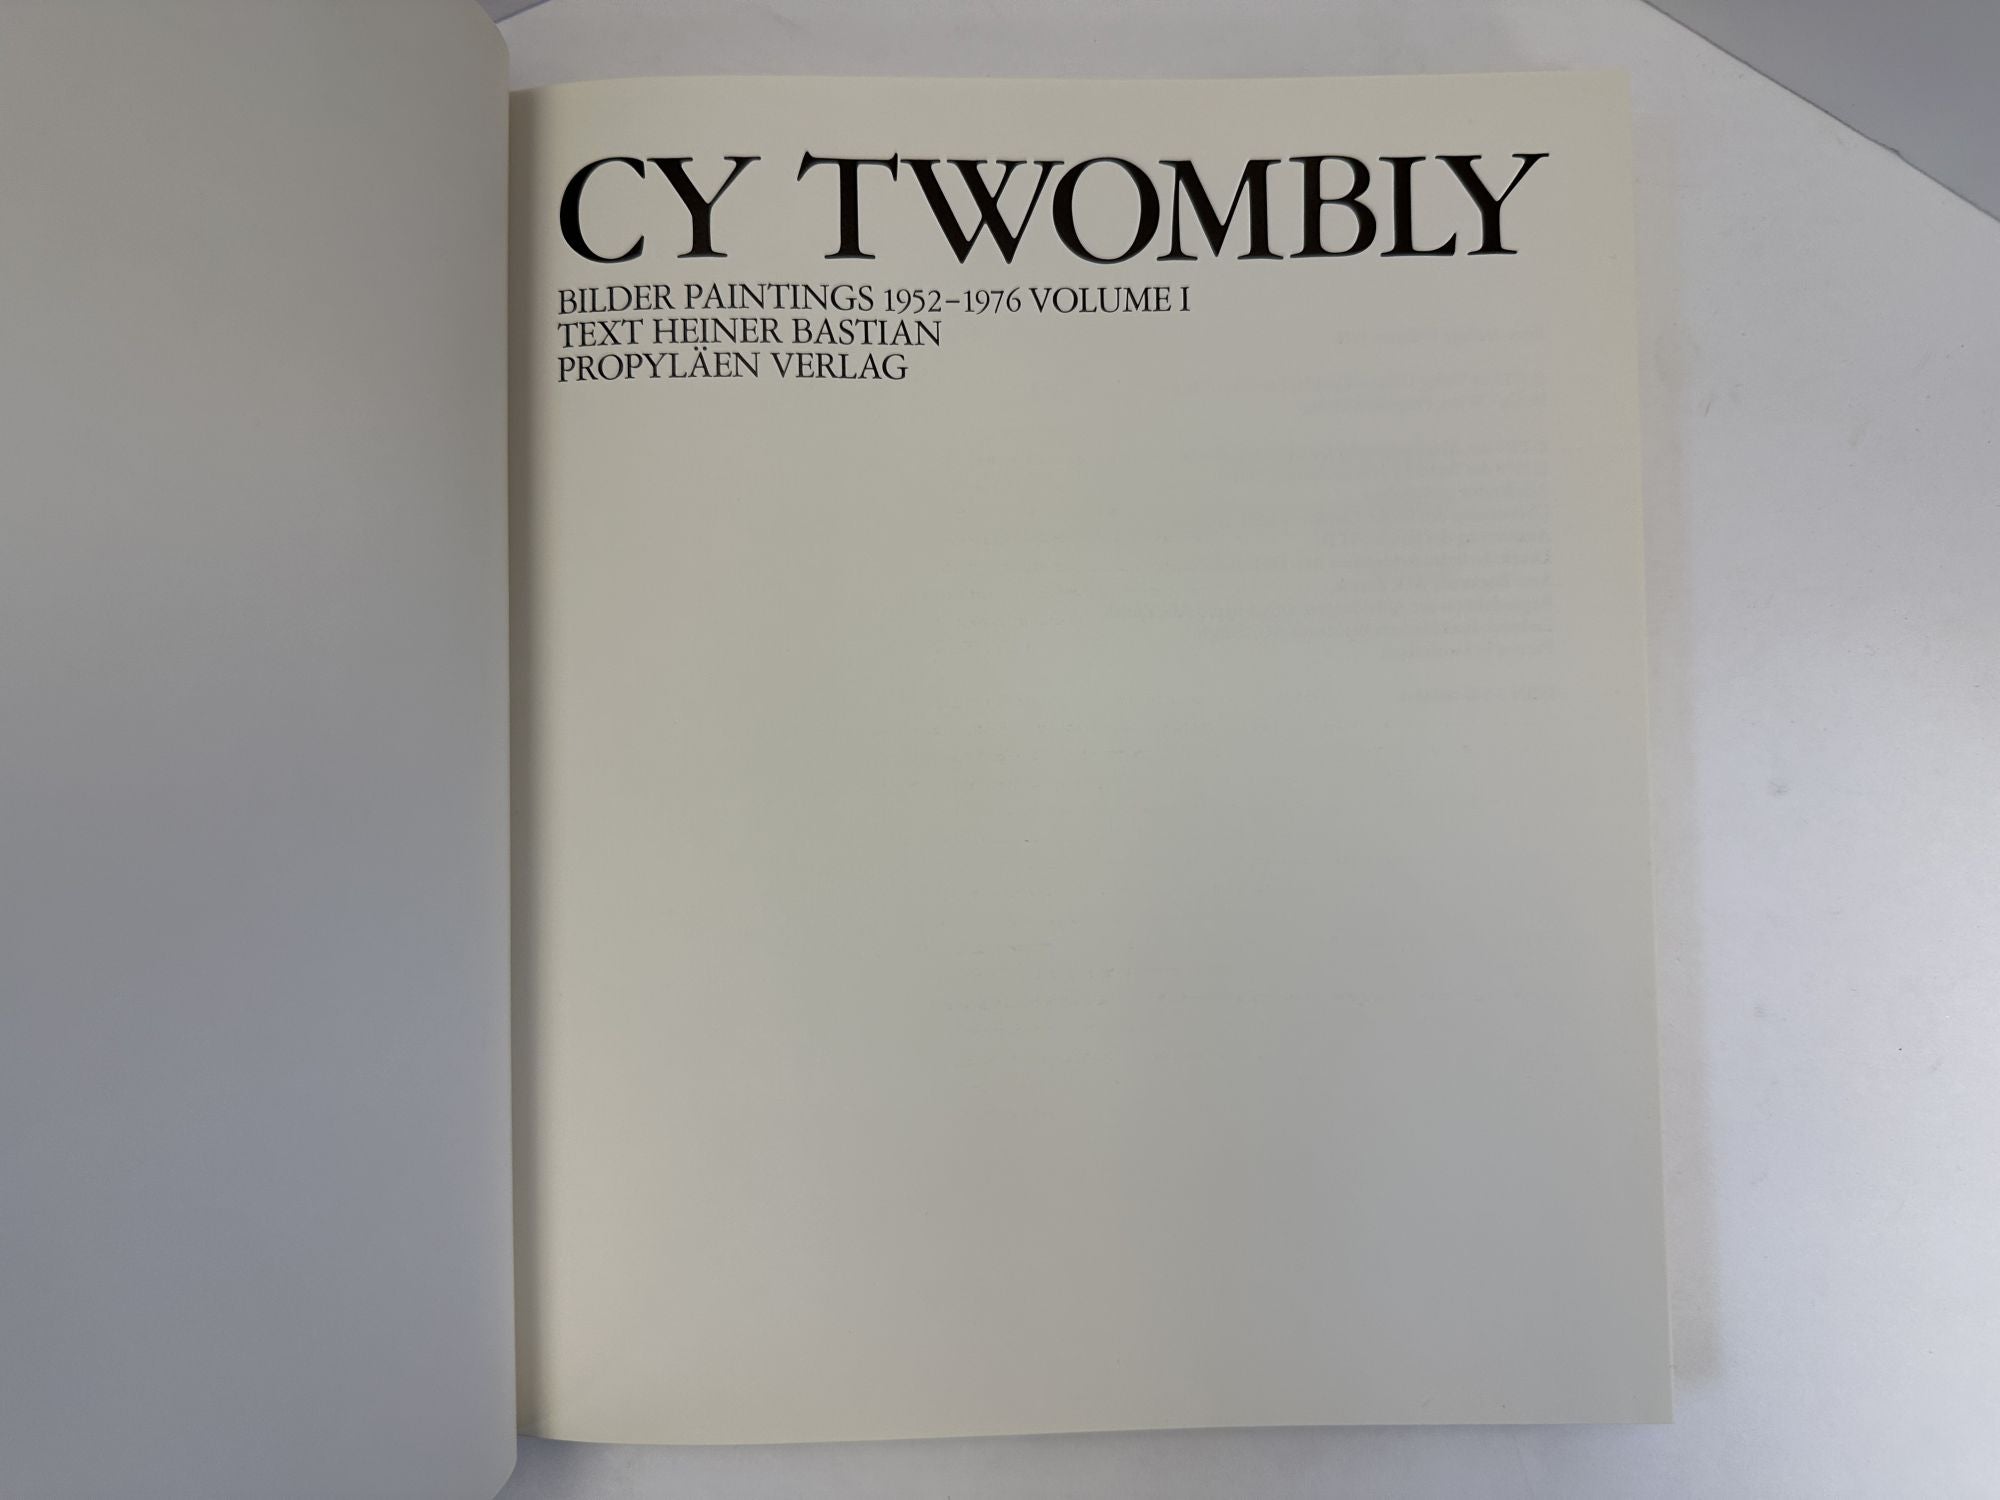 pagesCy Twombly / Bilder Paintings 1952-1976